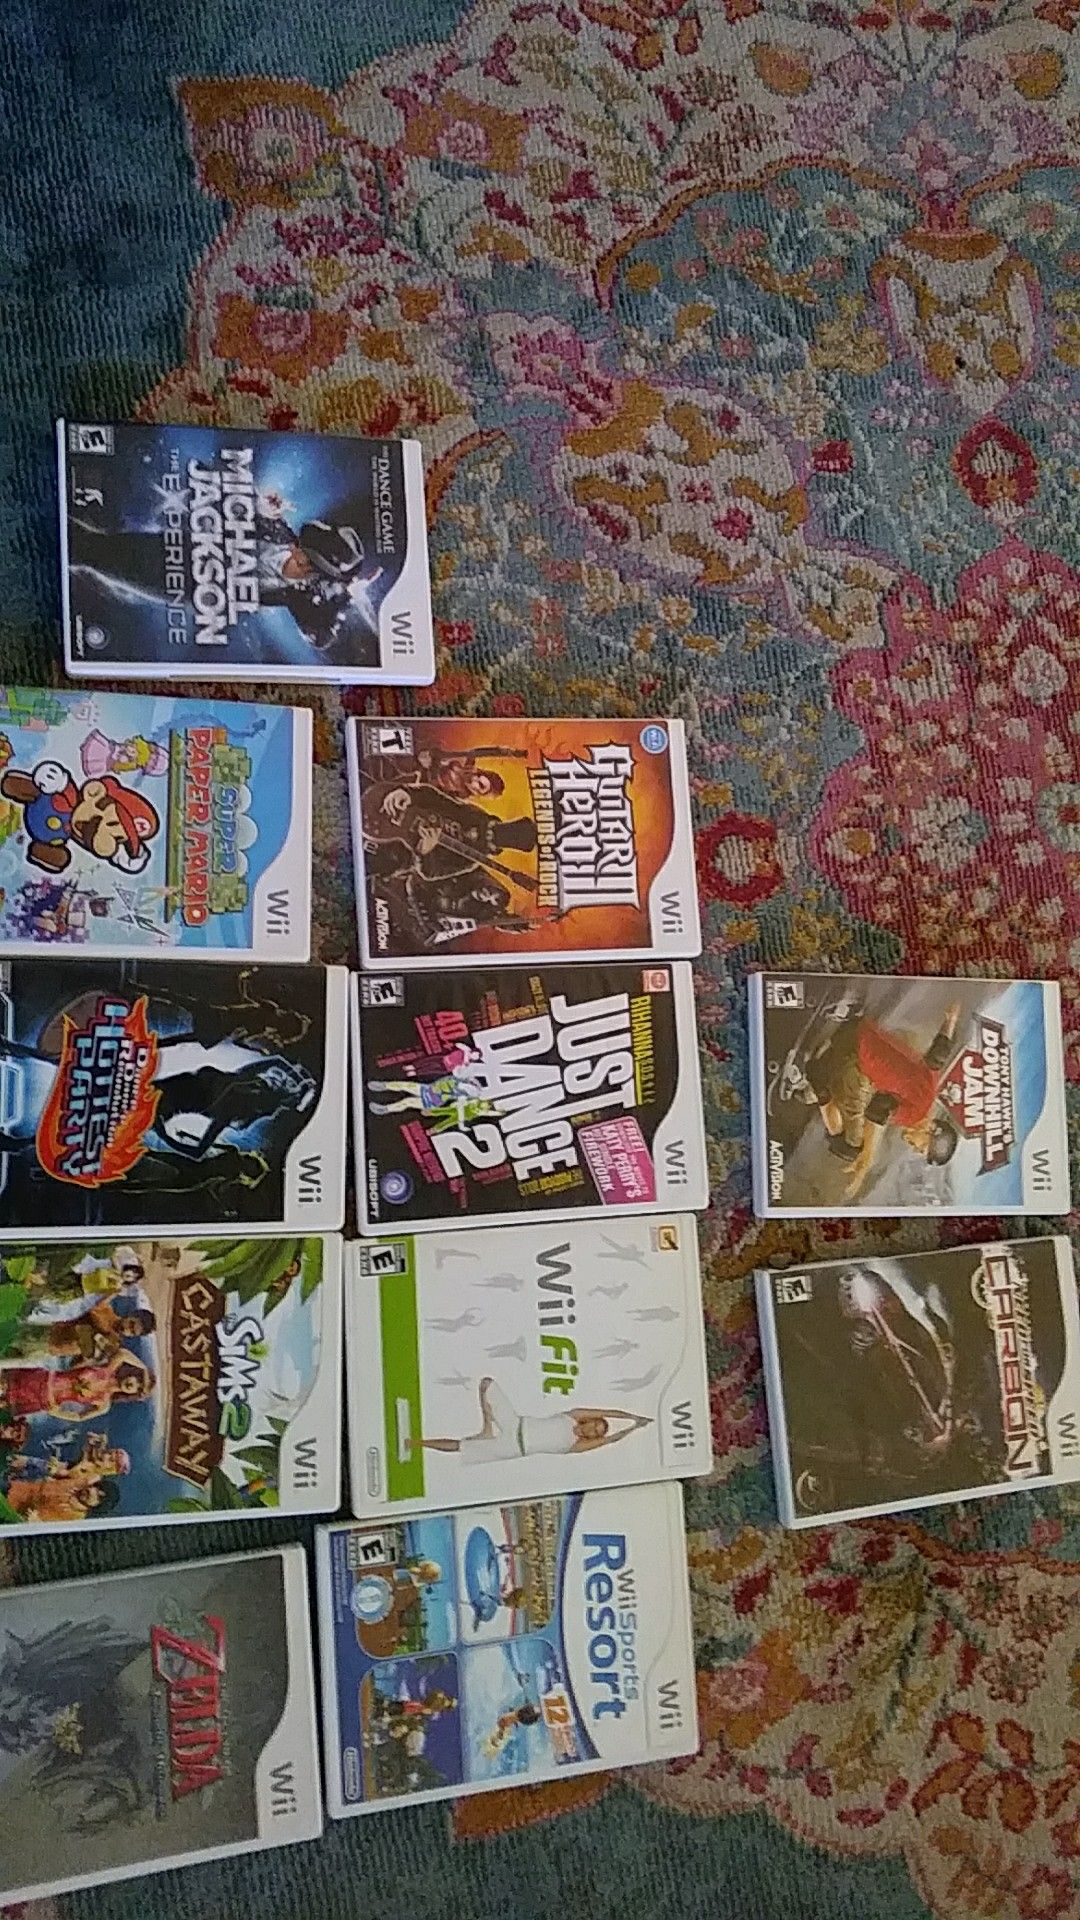 11 wii games. All like new